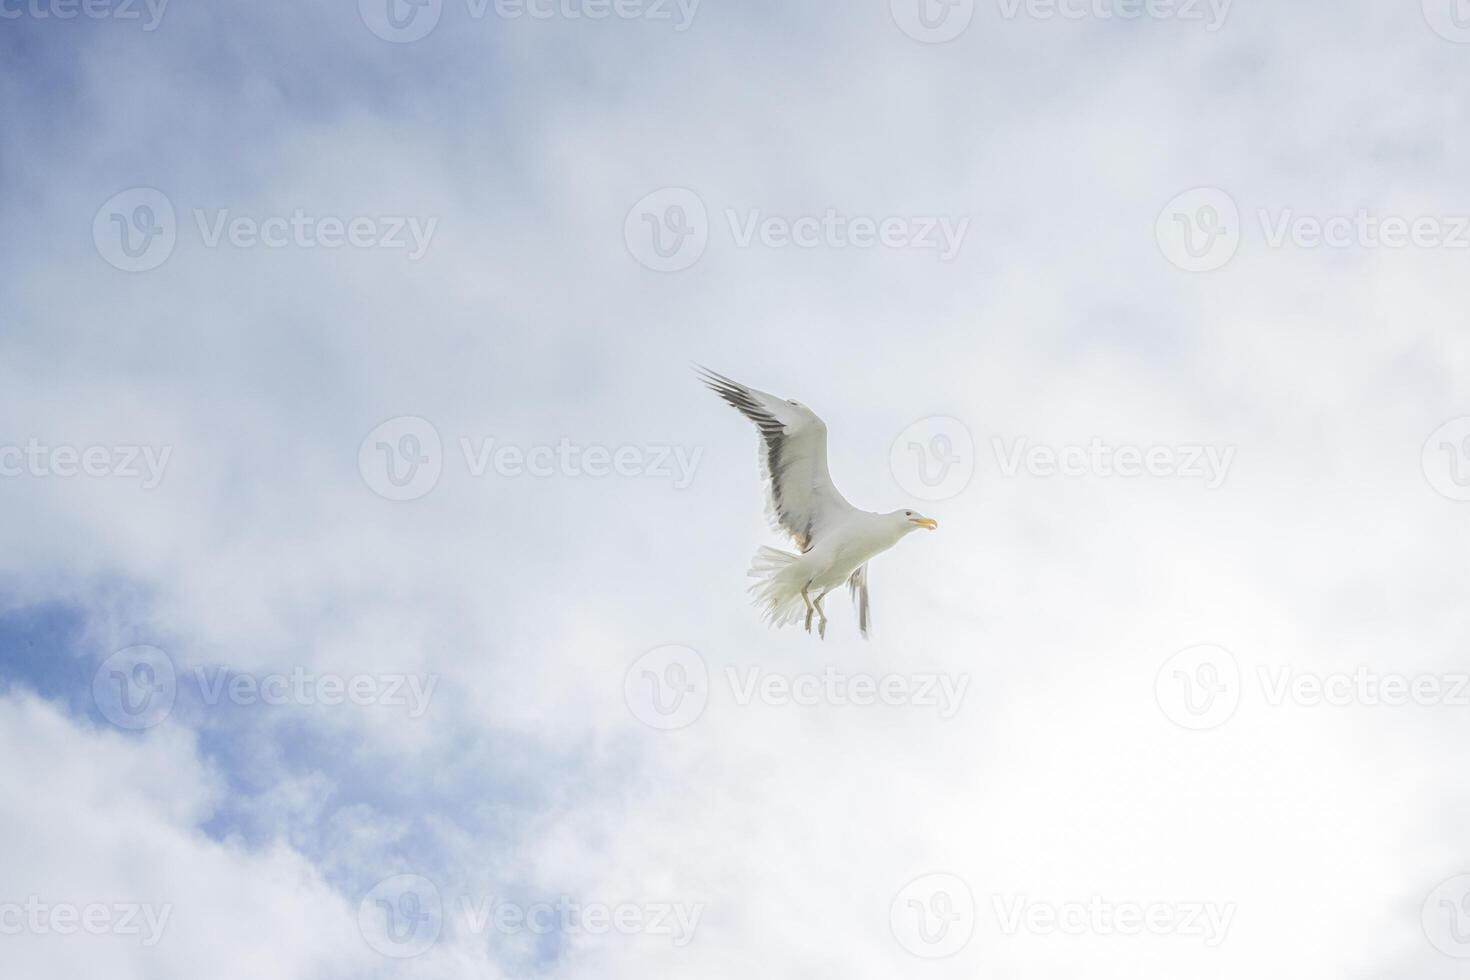 Image of a seagull in flight against a blue sky photo